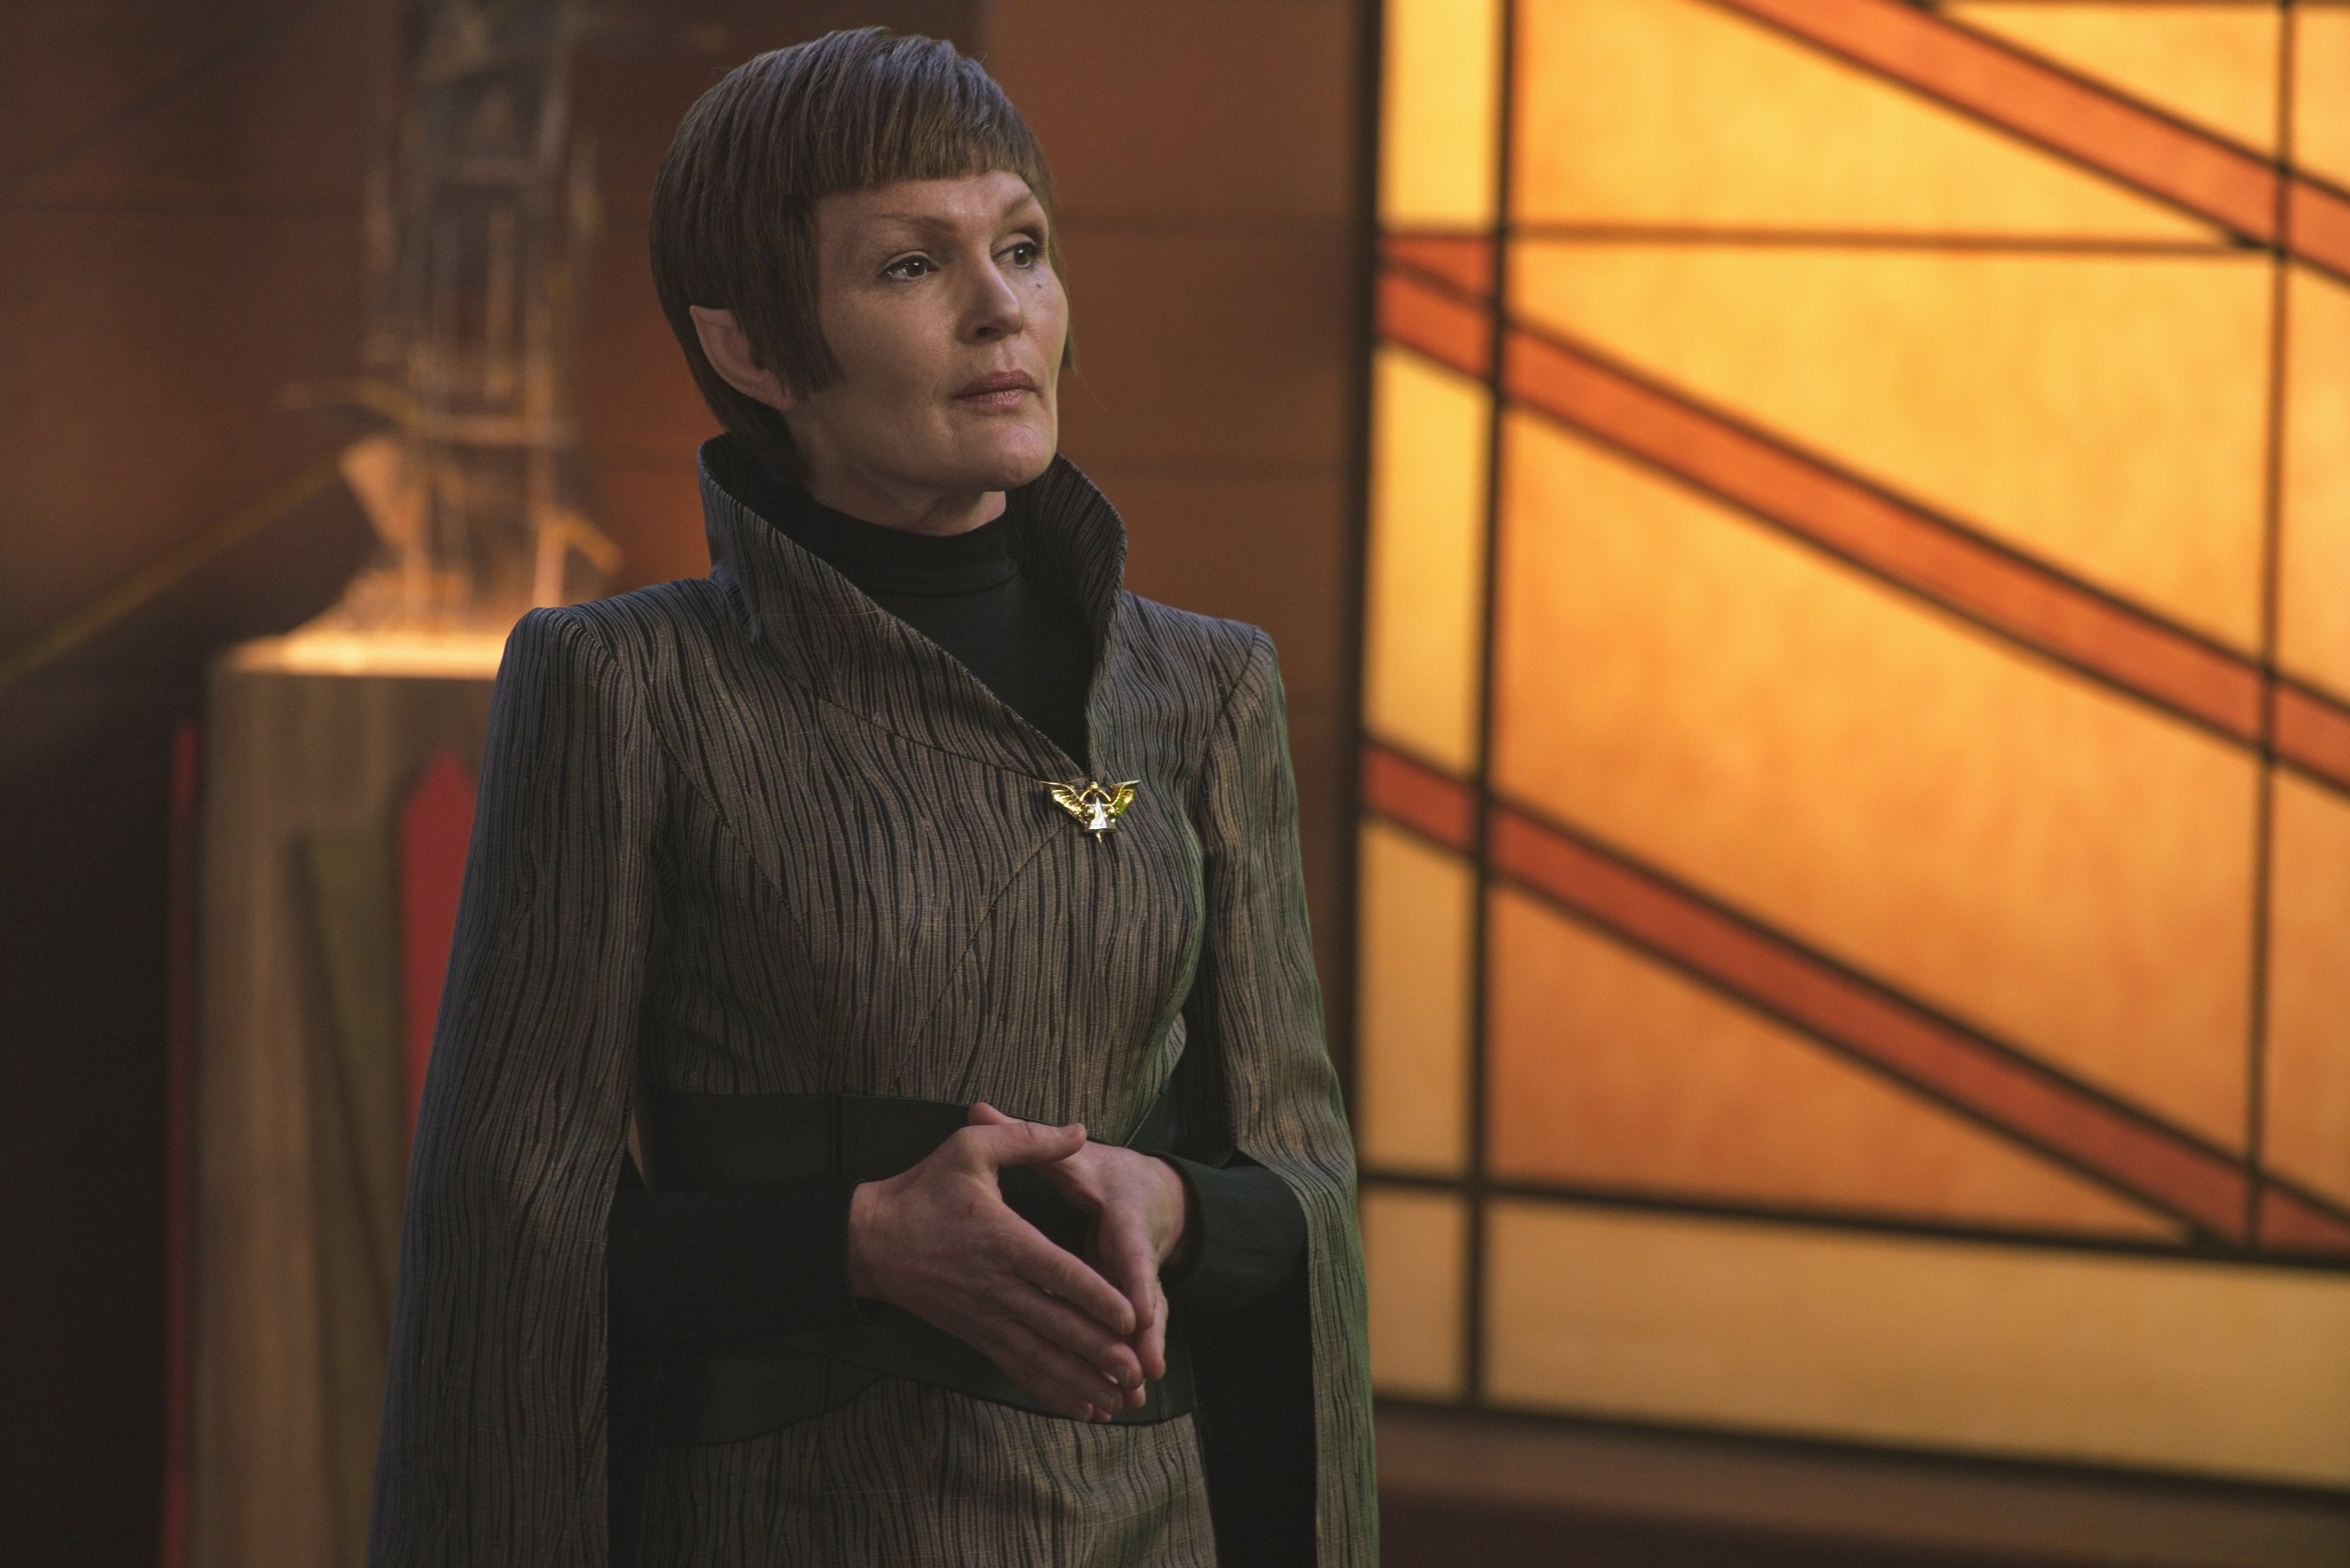   Pictured: Tara Rosling as T'Rina of the Paramount+ original series STAR TREK: DISCOVERY. Photo Cr: Michael Gibson/Paramount+ © 2021 CBS Interactive. All Rights Reserved.  